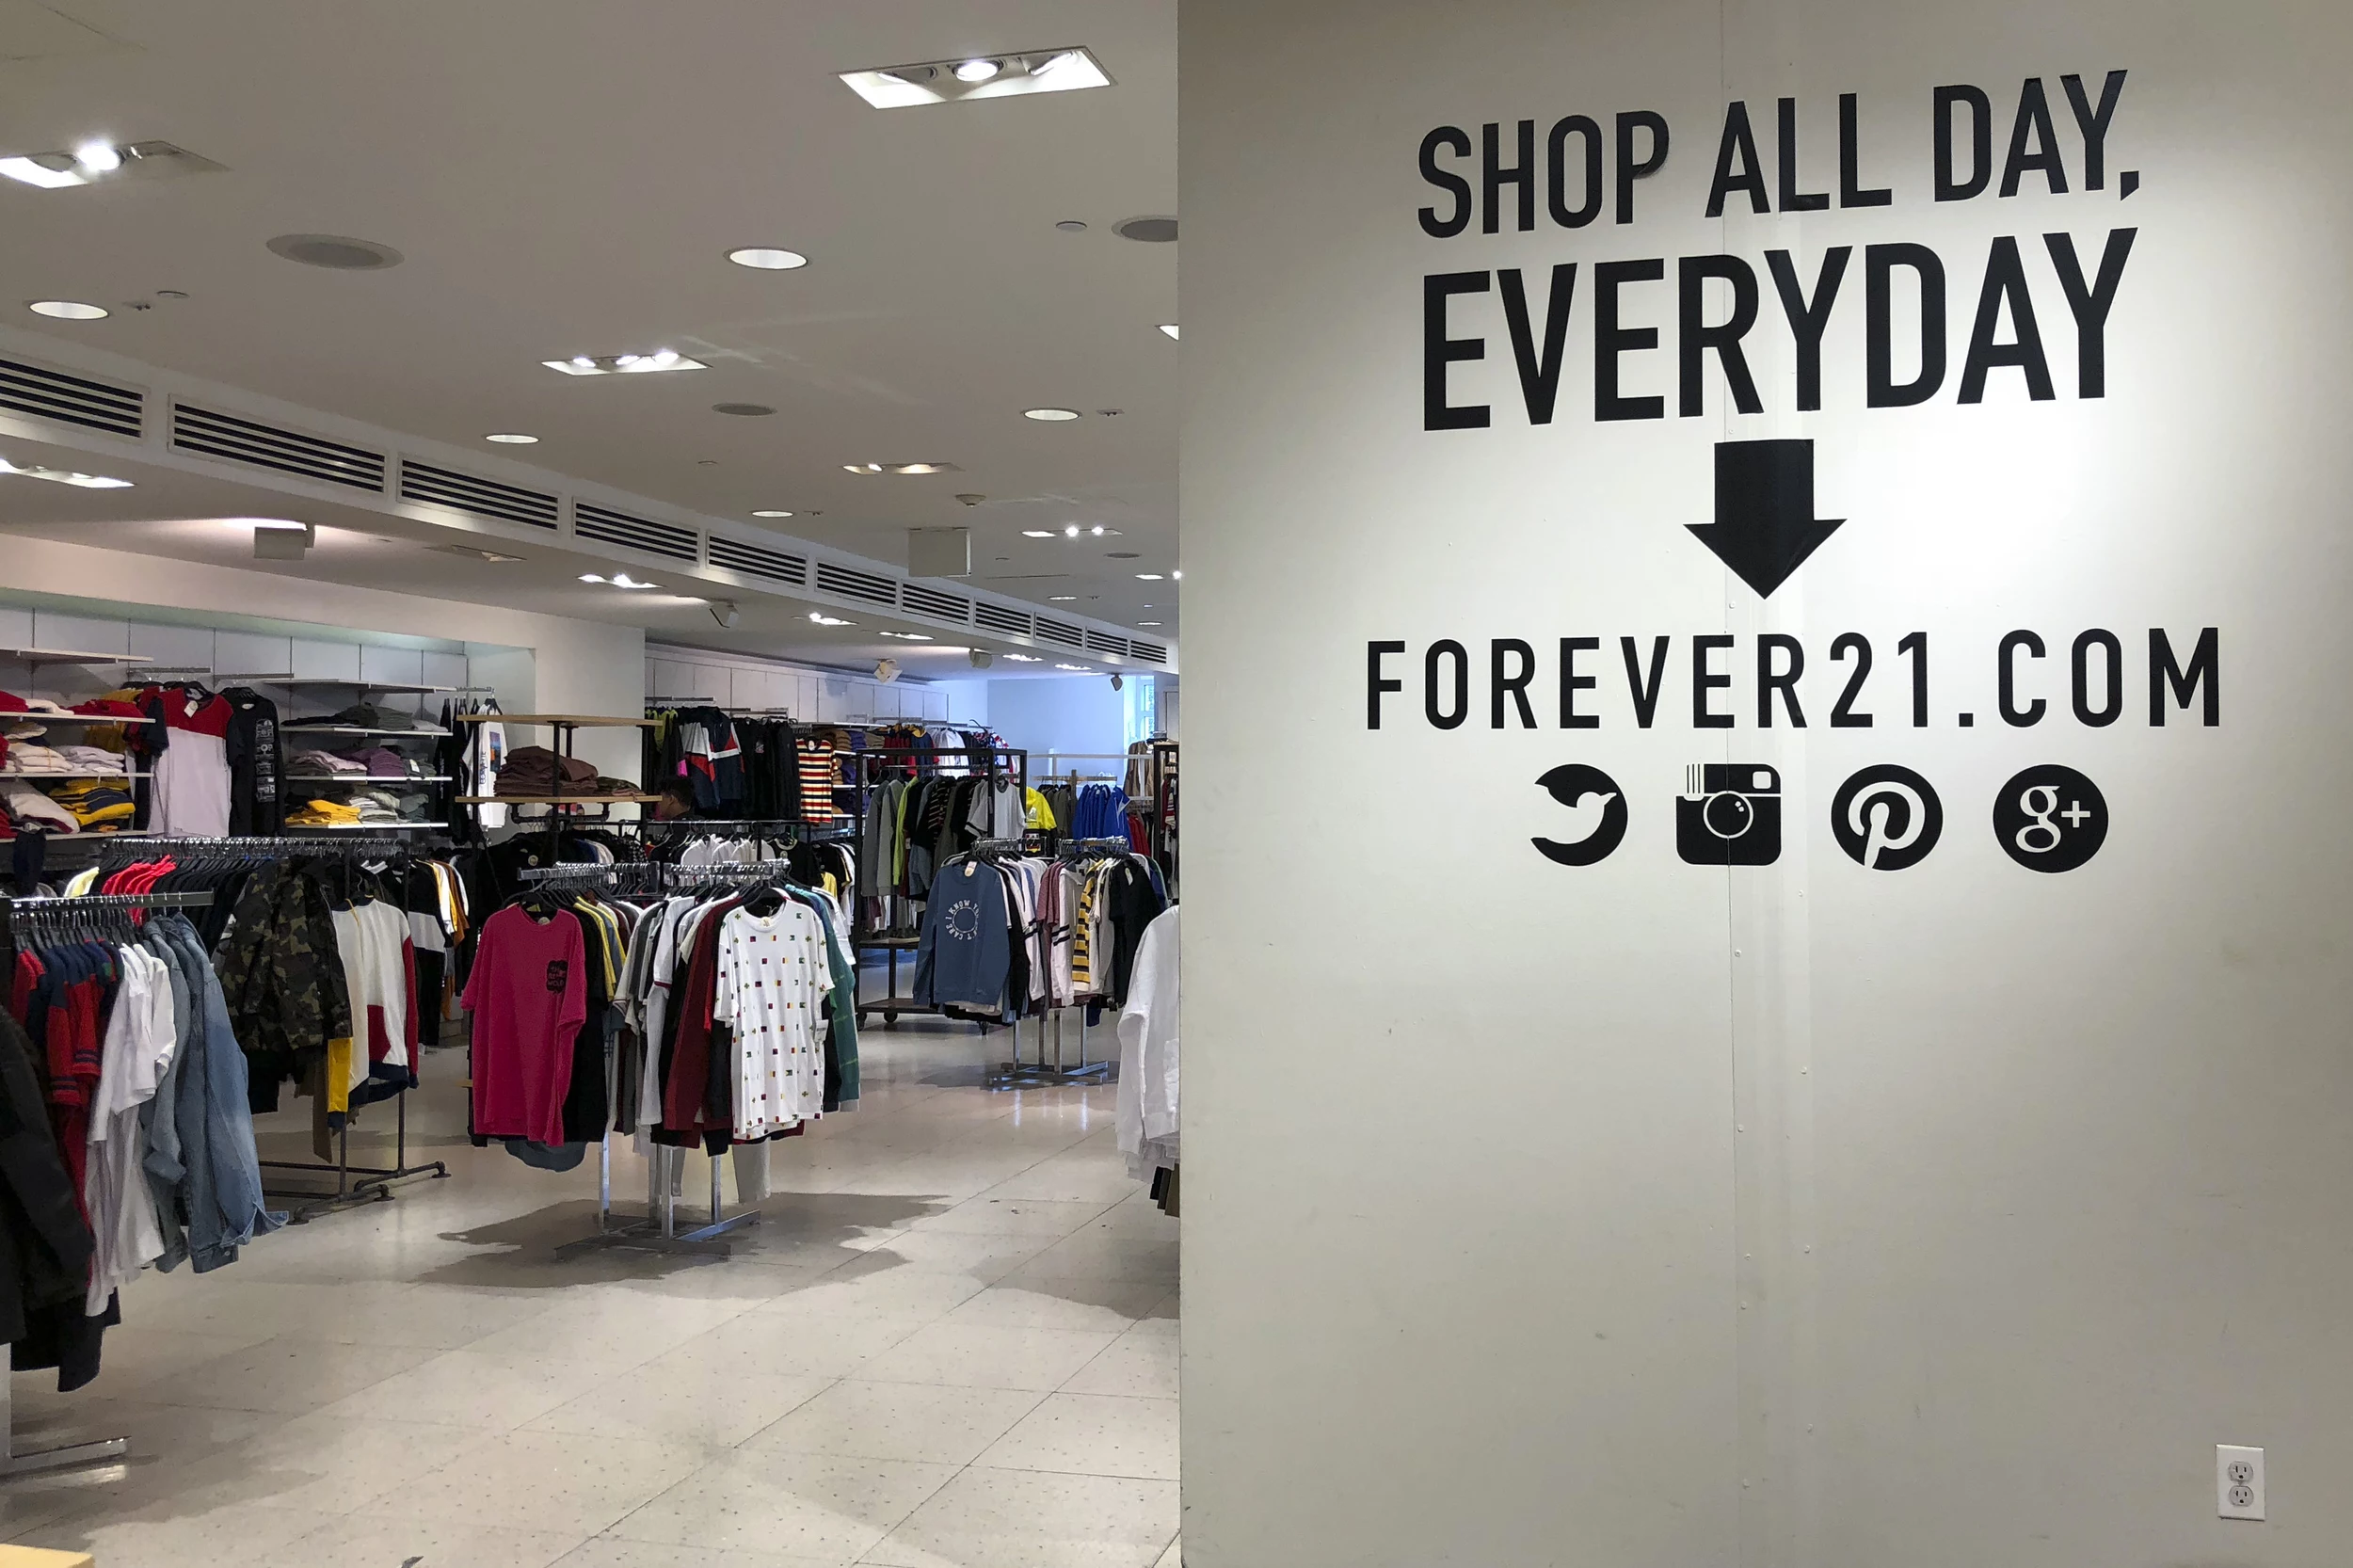 UPDATE: Here's a map of the Forever 21 stores that could close by